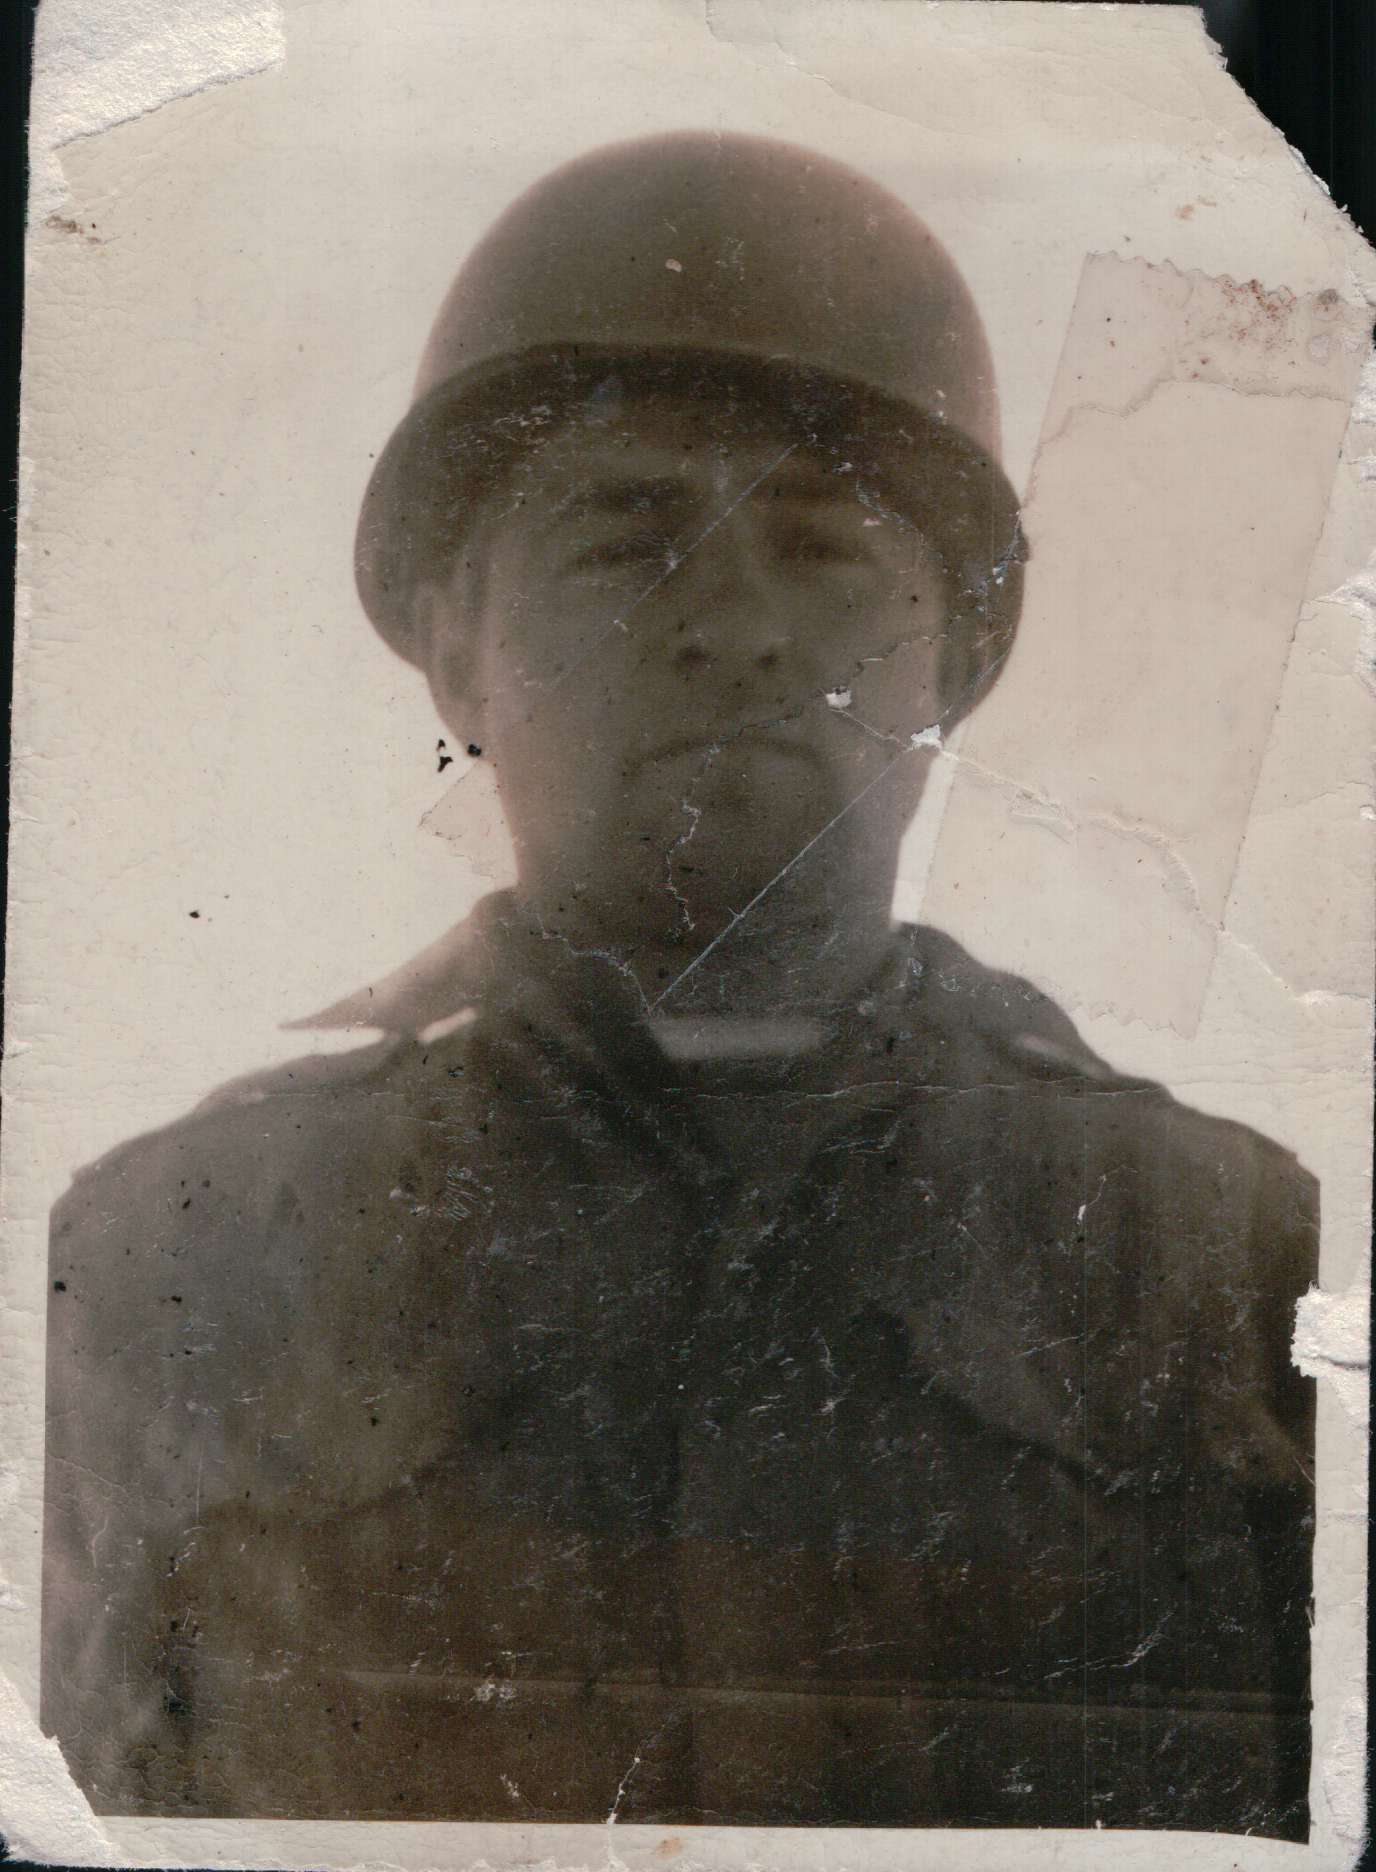 A picture of Ronald Rosser in December of 1951 in Kumhwa, Korea.